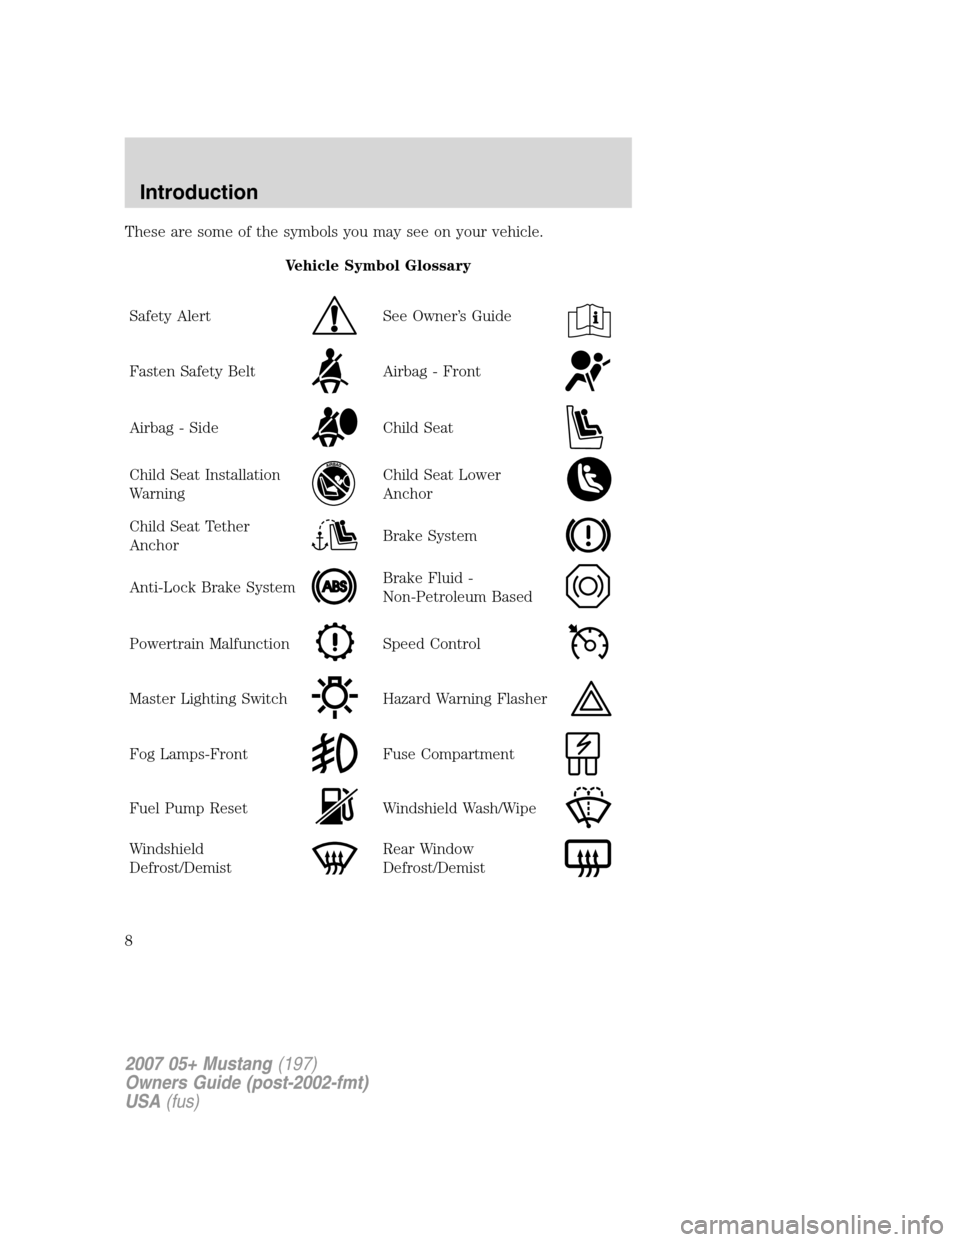 FORD MUSTANG 2007 5.G Owners Manual These are some of the symbols you may see on your vehicle.
Vehicle Symbol Glossary
Safety Alert
See Owner’s Guide
Fasten Safety BeltAirbag - Front
Airbag - SideChild Seat
Child Seat Installation
War